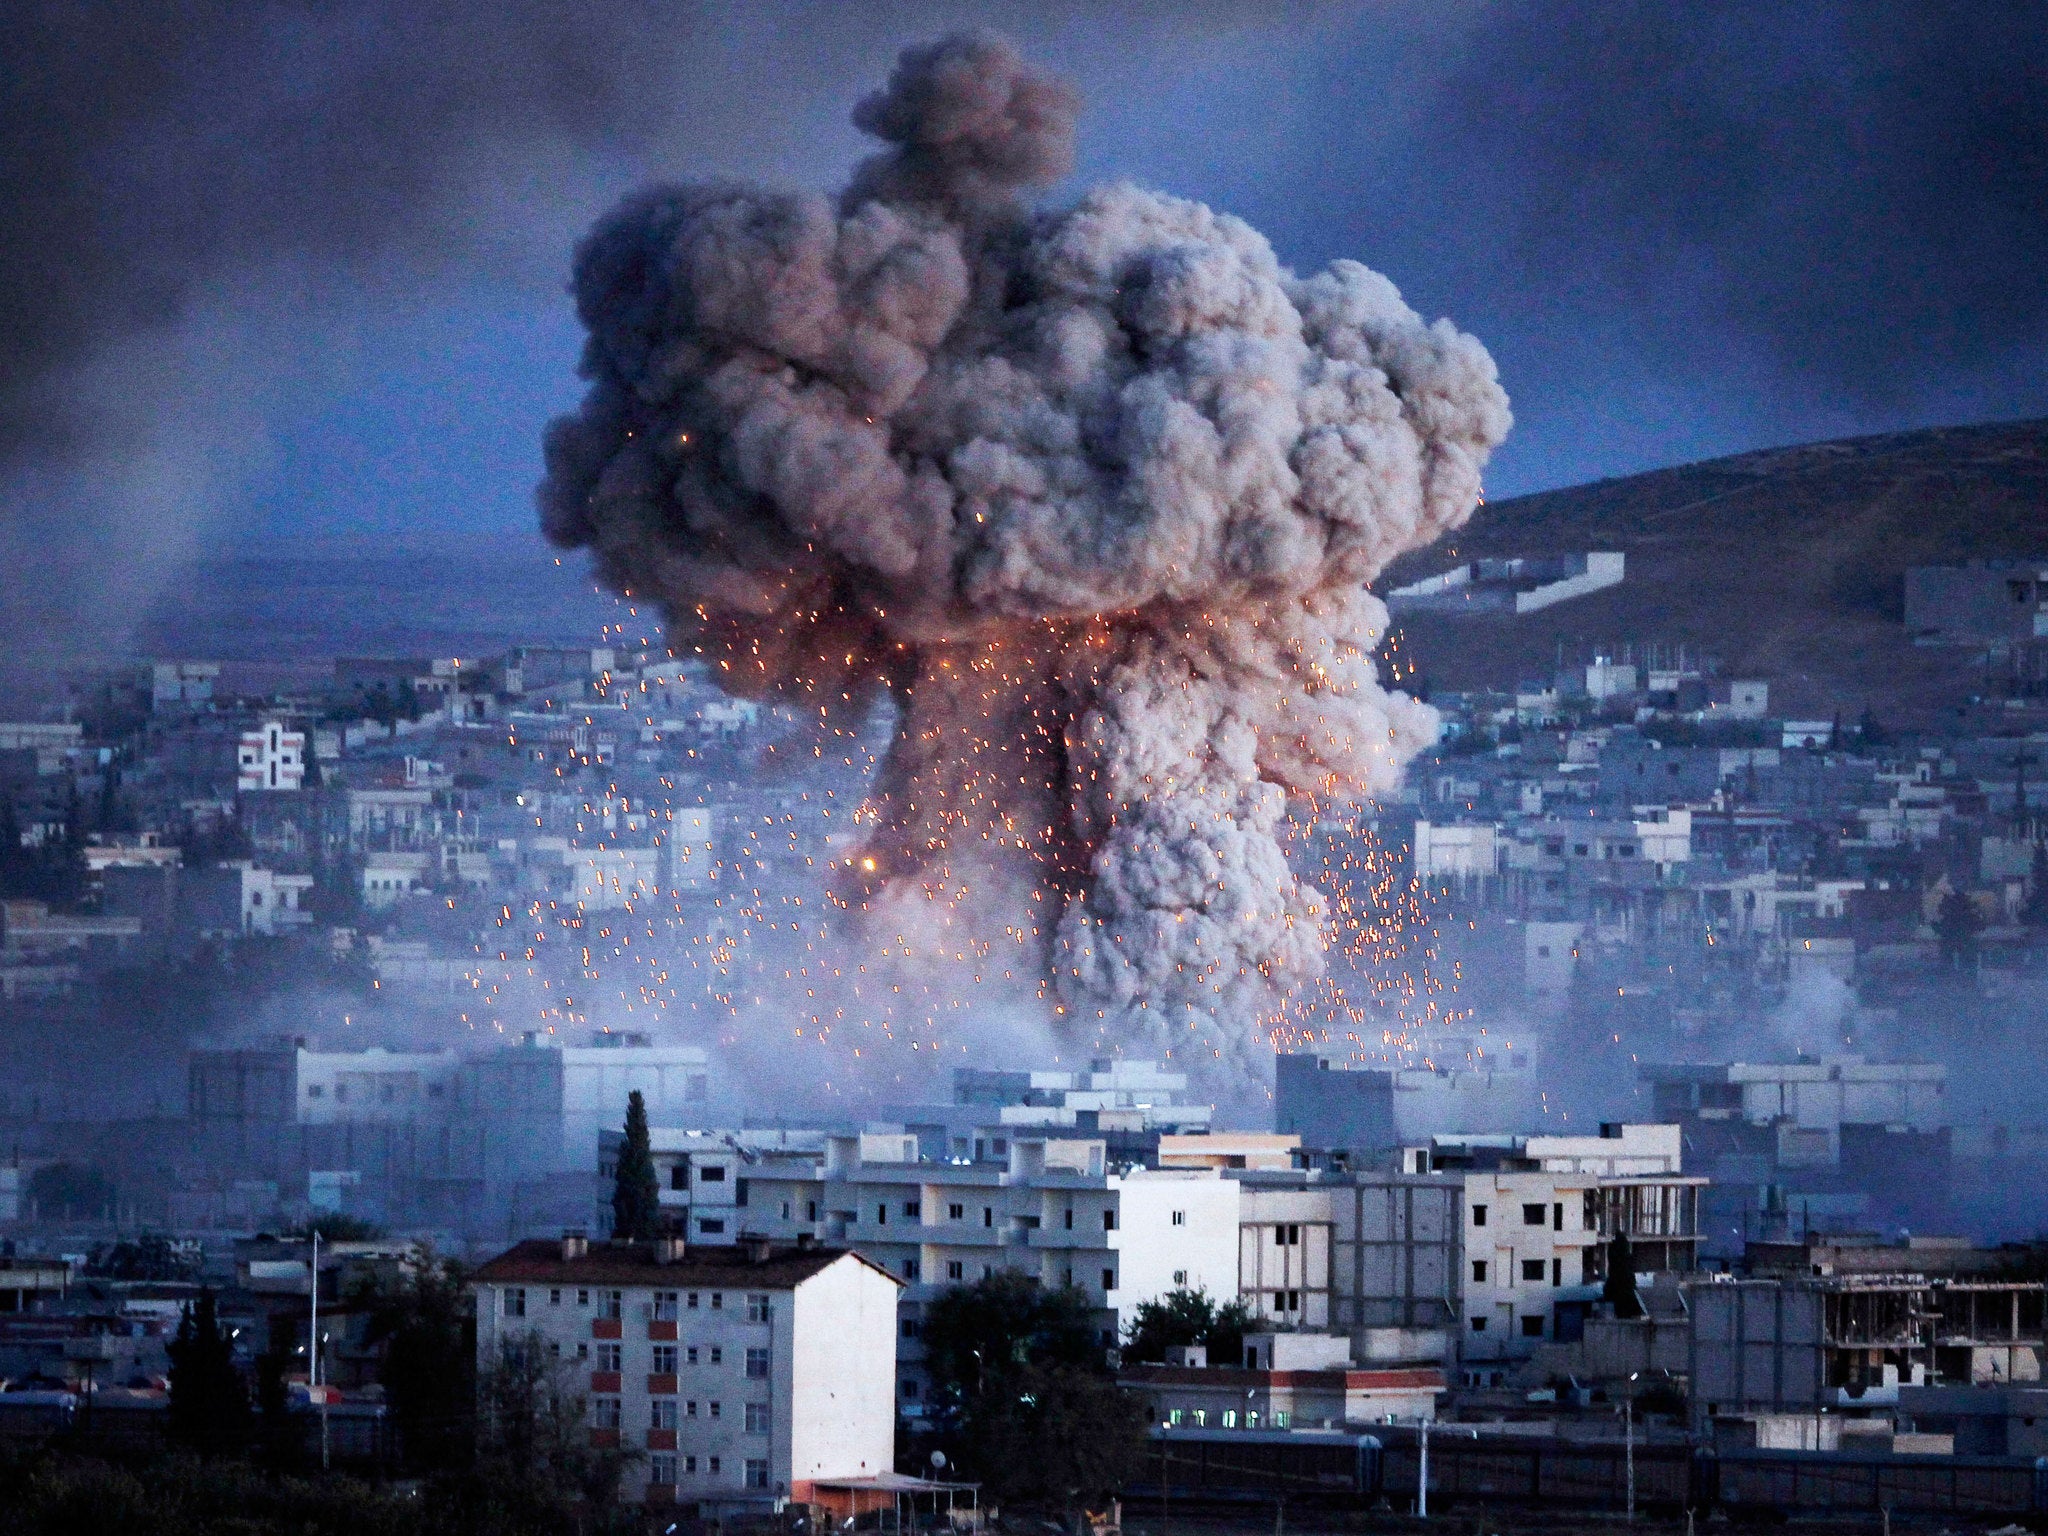 An explosion from a suicide car bomb attack rocks the city of Kobani in Syria, the least peaceful country in the world